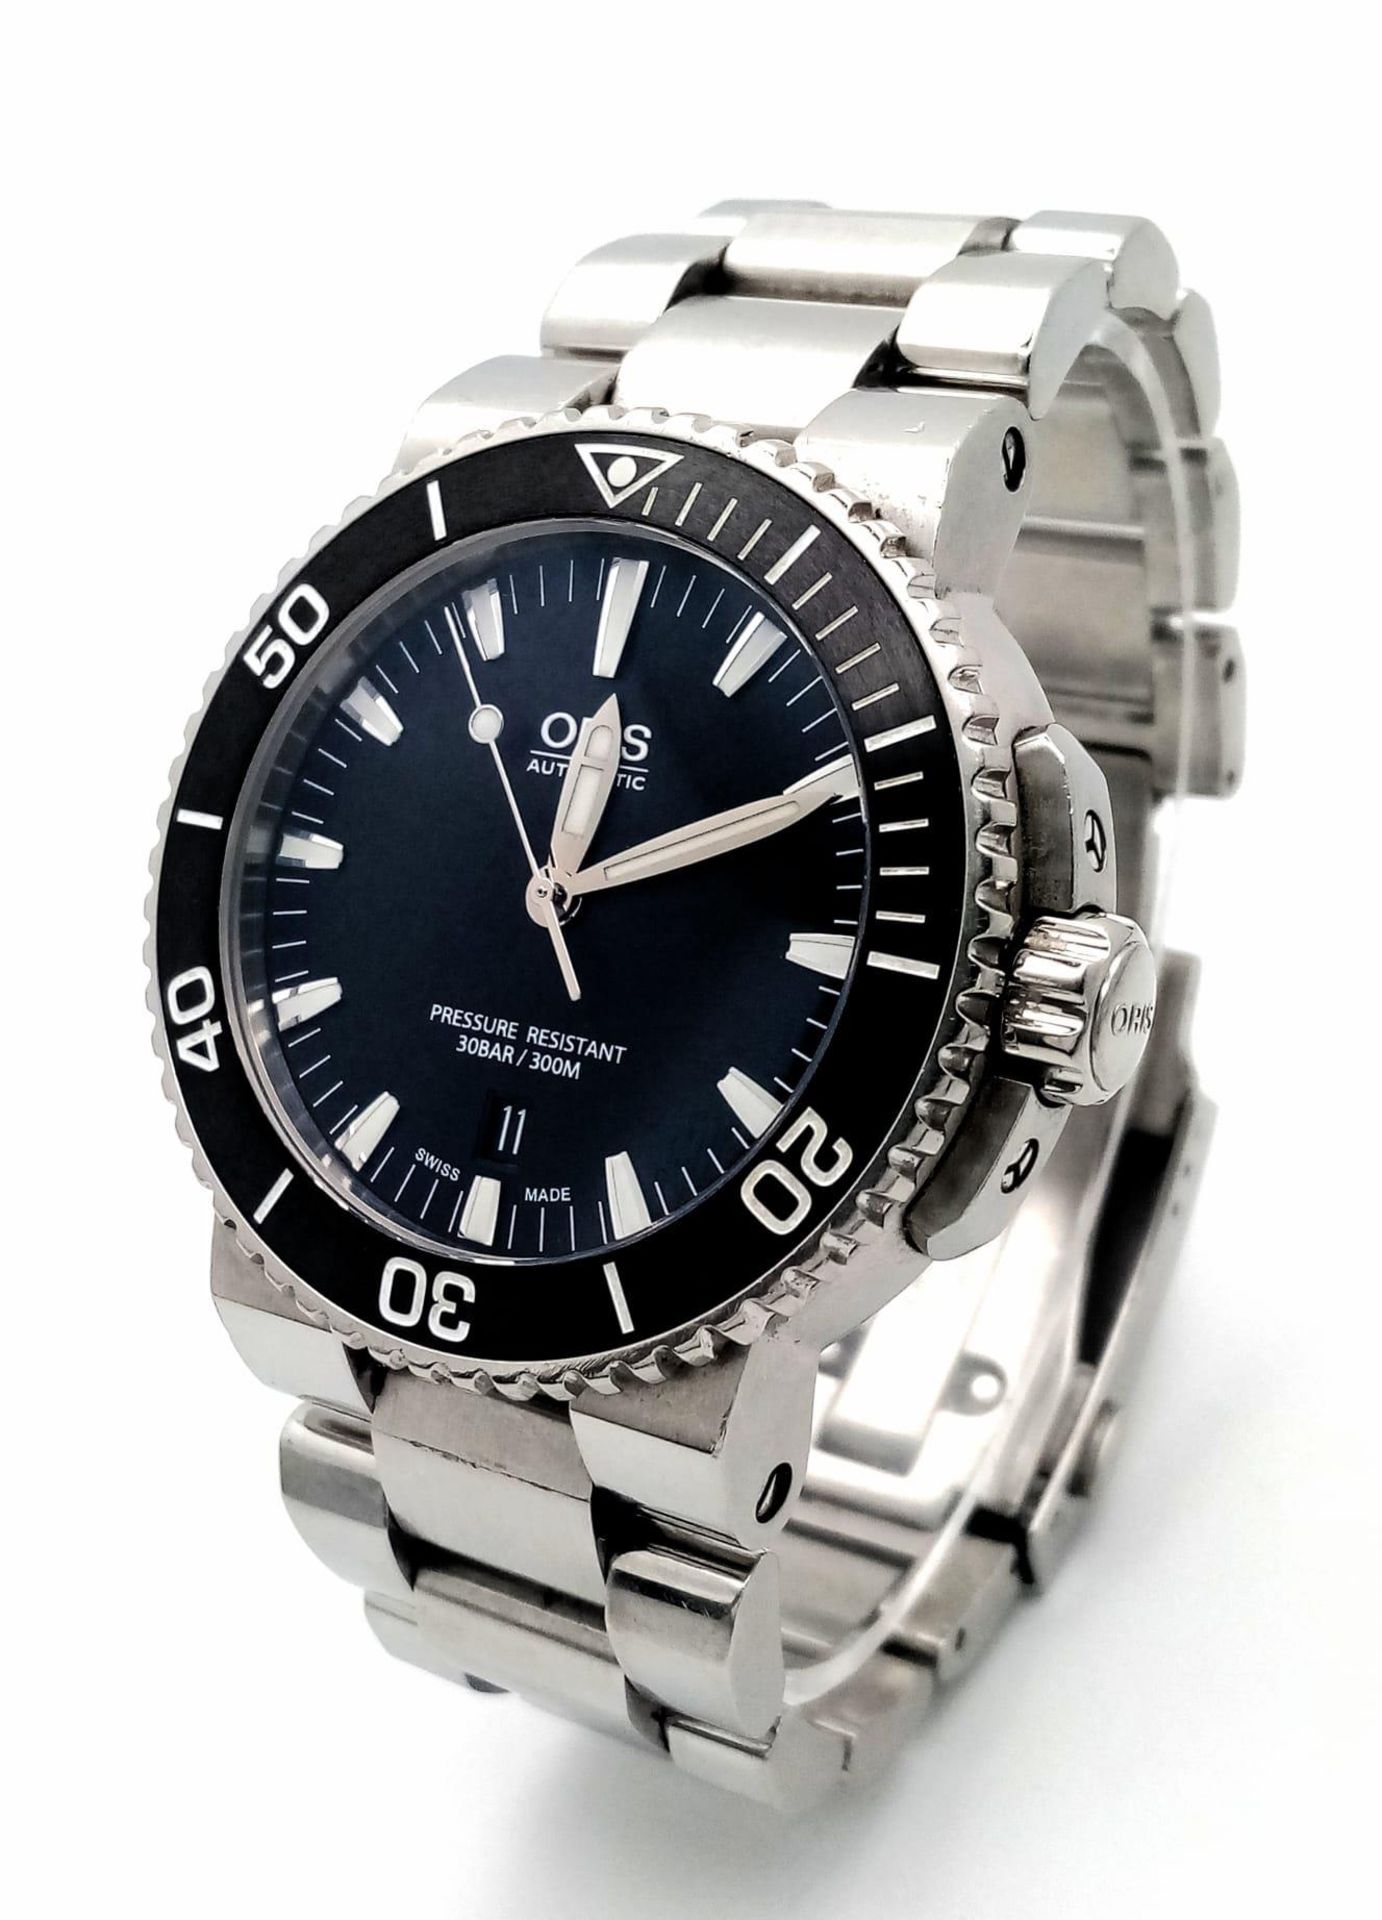 An Oris Automatic Gents Divers Watch. Stainless steel bracelet and case - 41mm. Black dial. Pressure